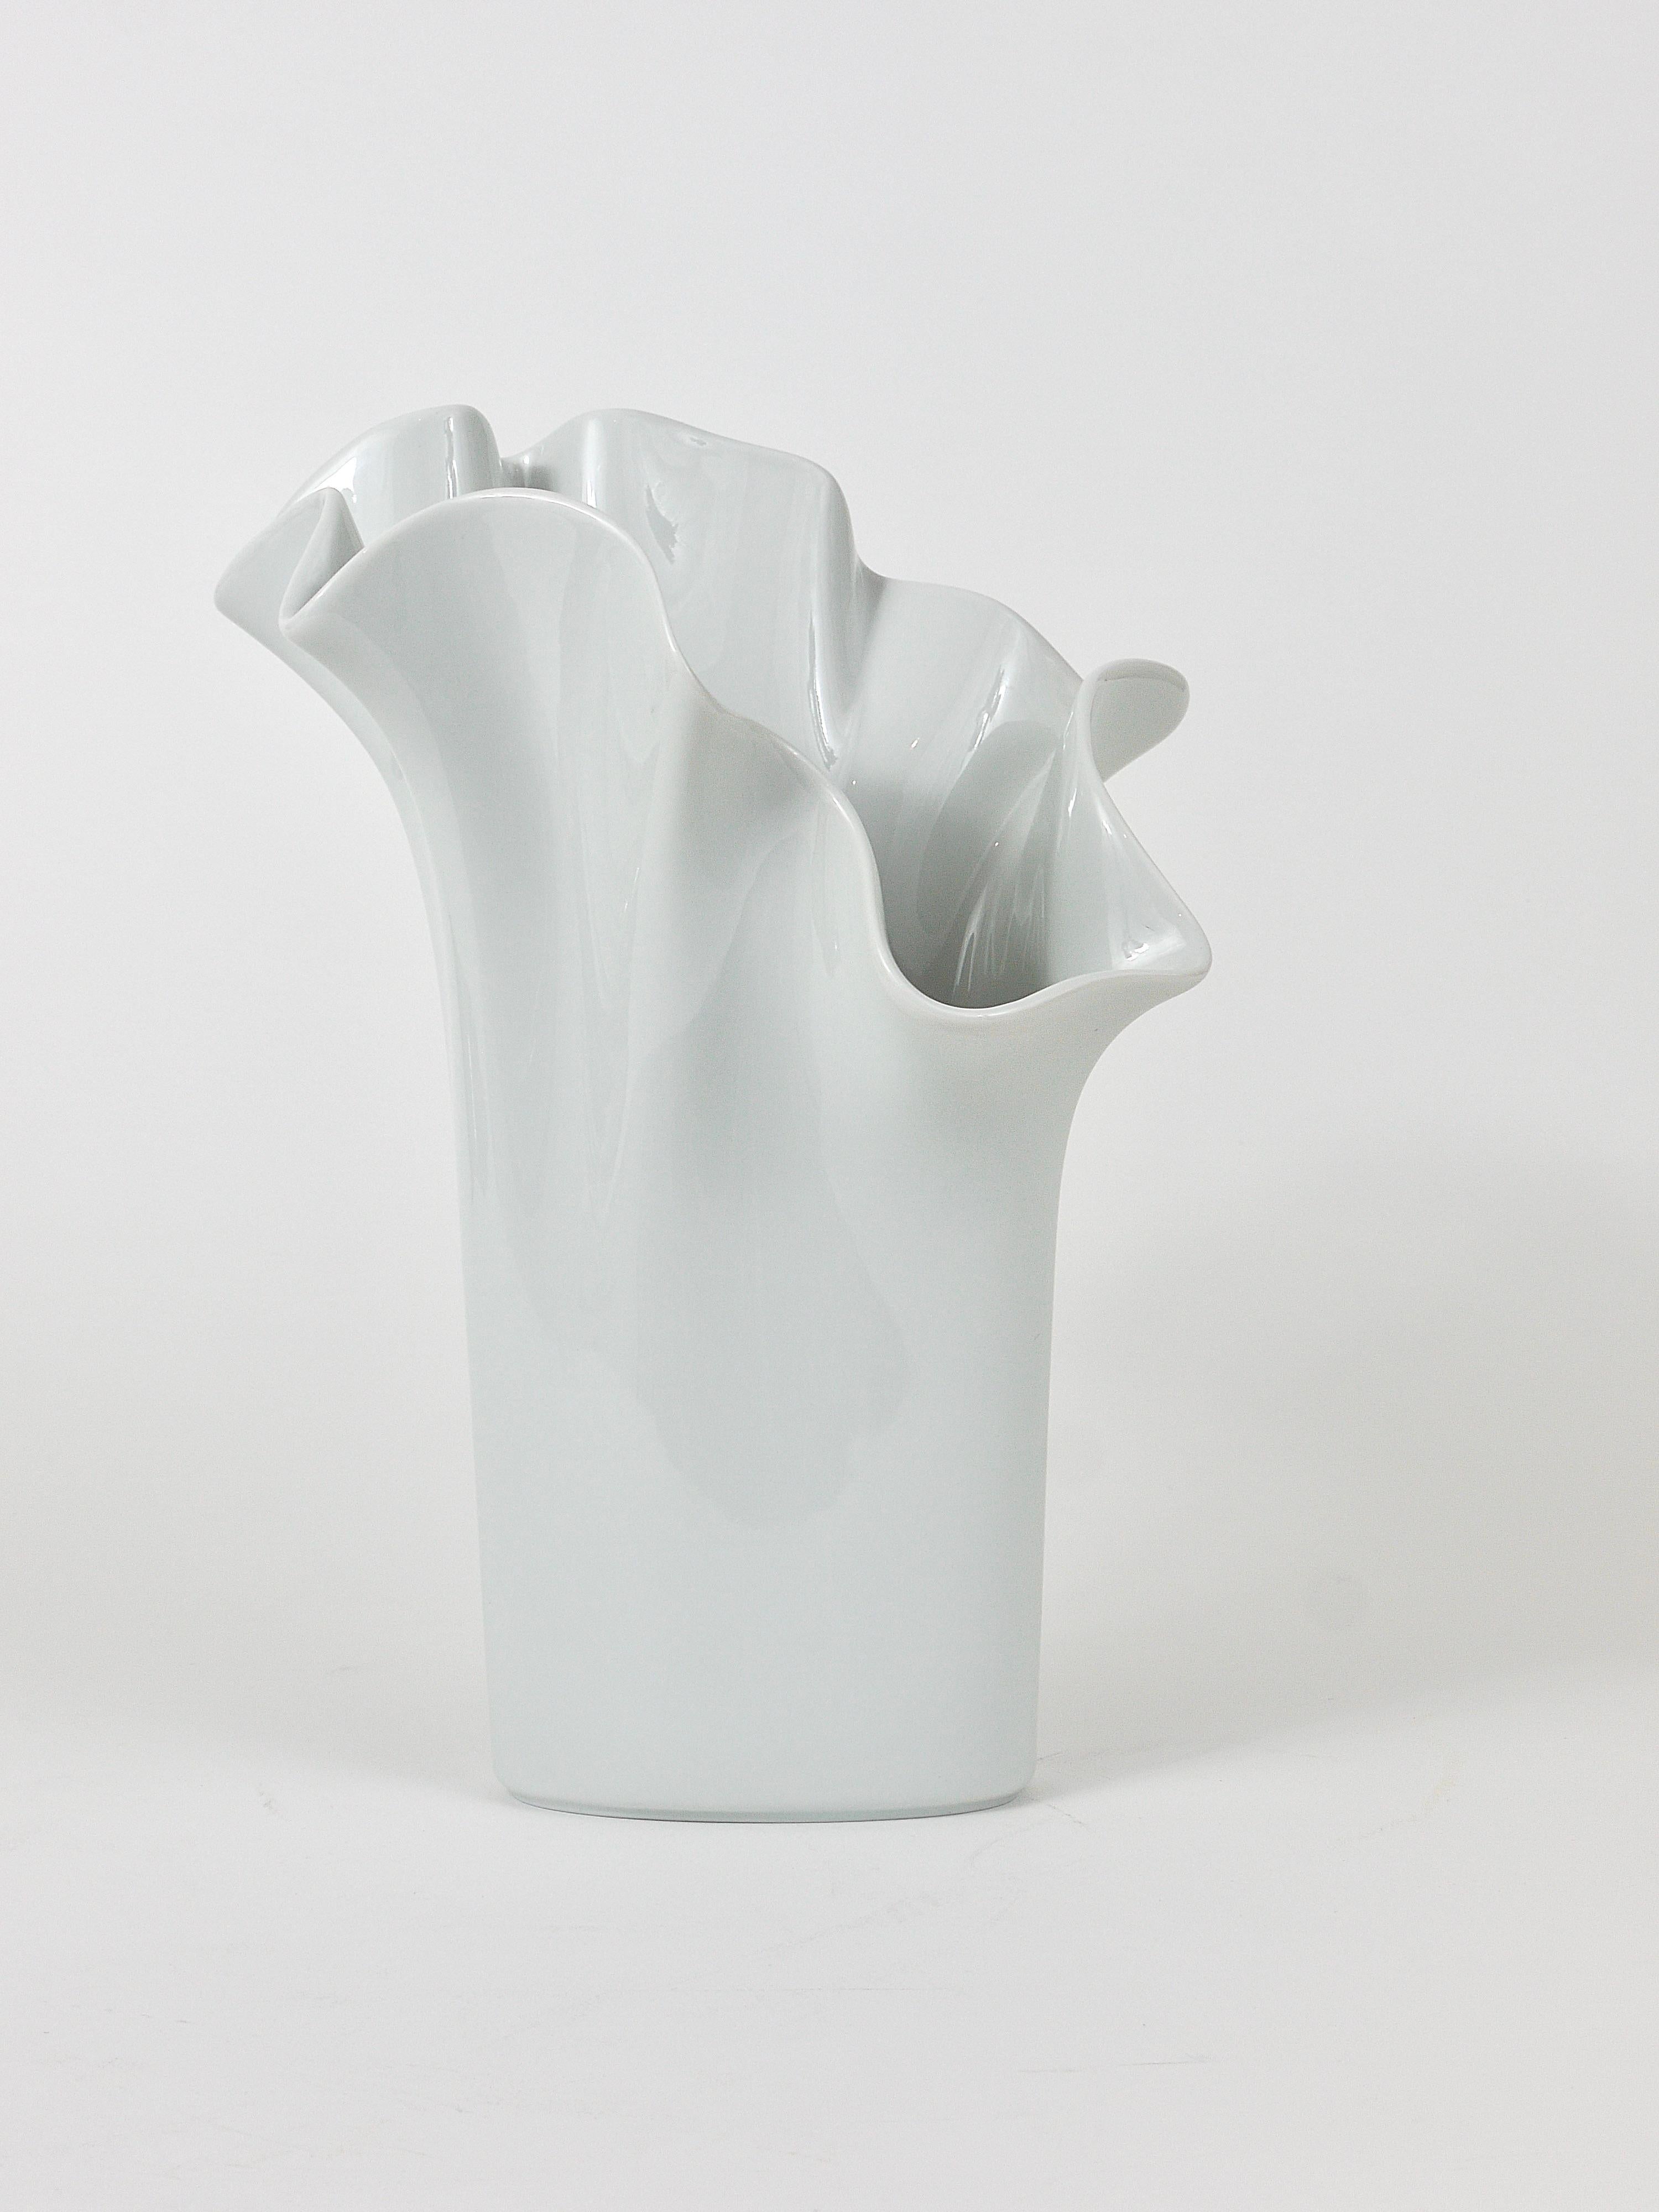 A beautiful large white Fazzoletto porcelain vase „Asym“ with white shiny glaze, designed in 1976 by Claus Jodef Riedel, executed by Rosenthal Studio-line, Germany. In excellent condition. Height 12 inches.